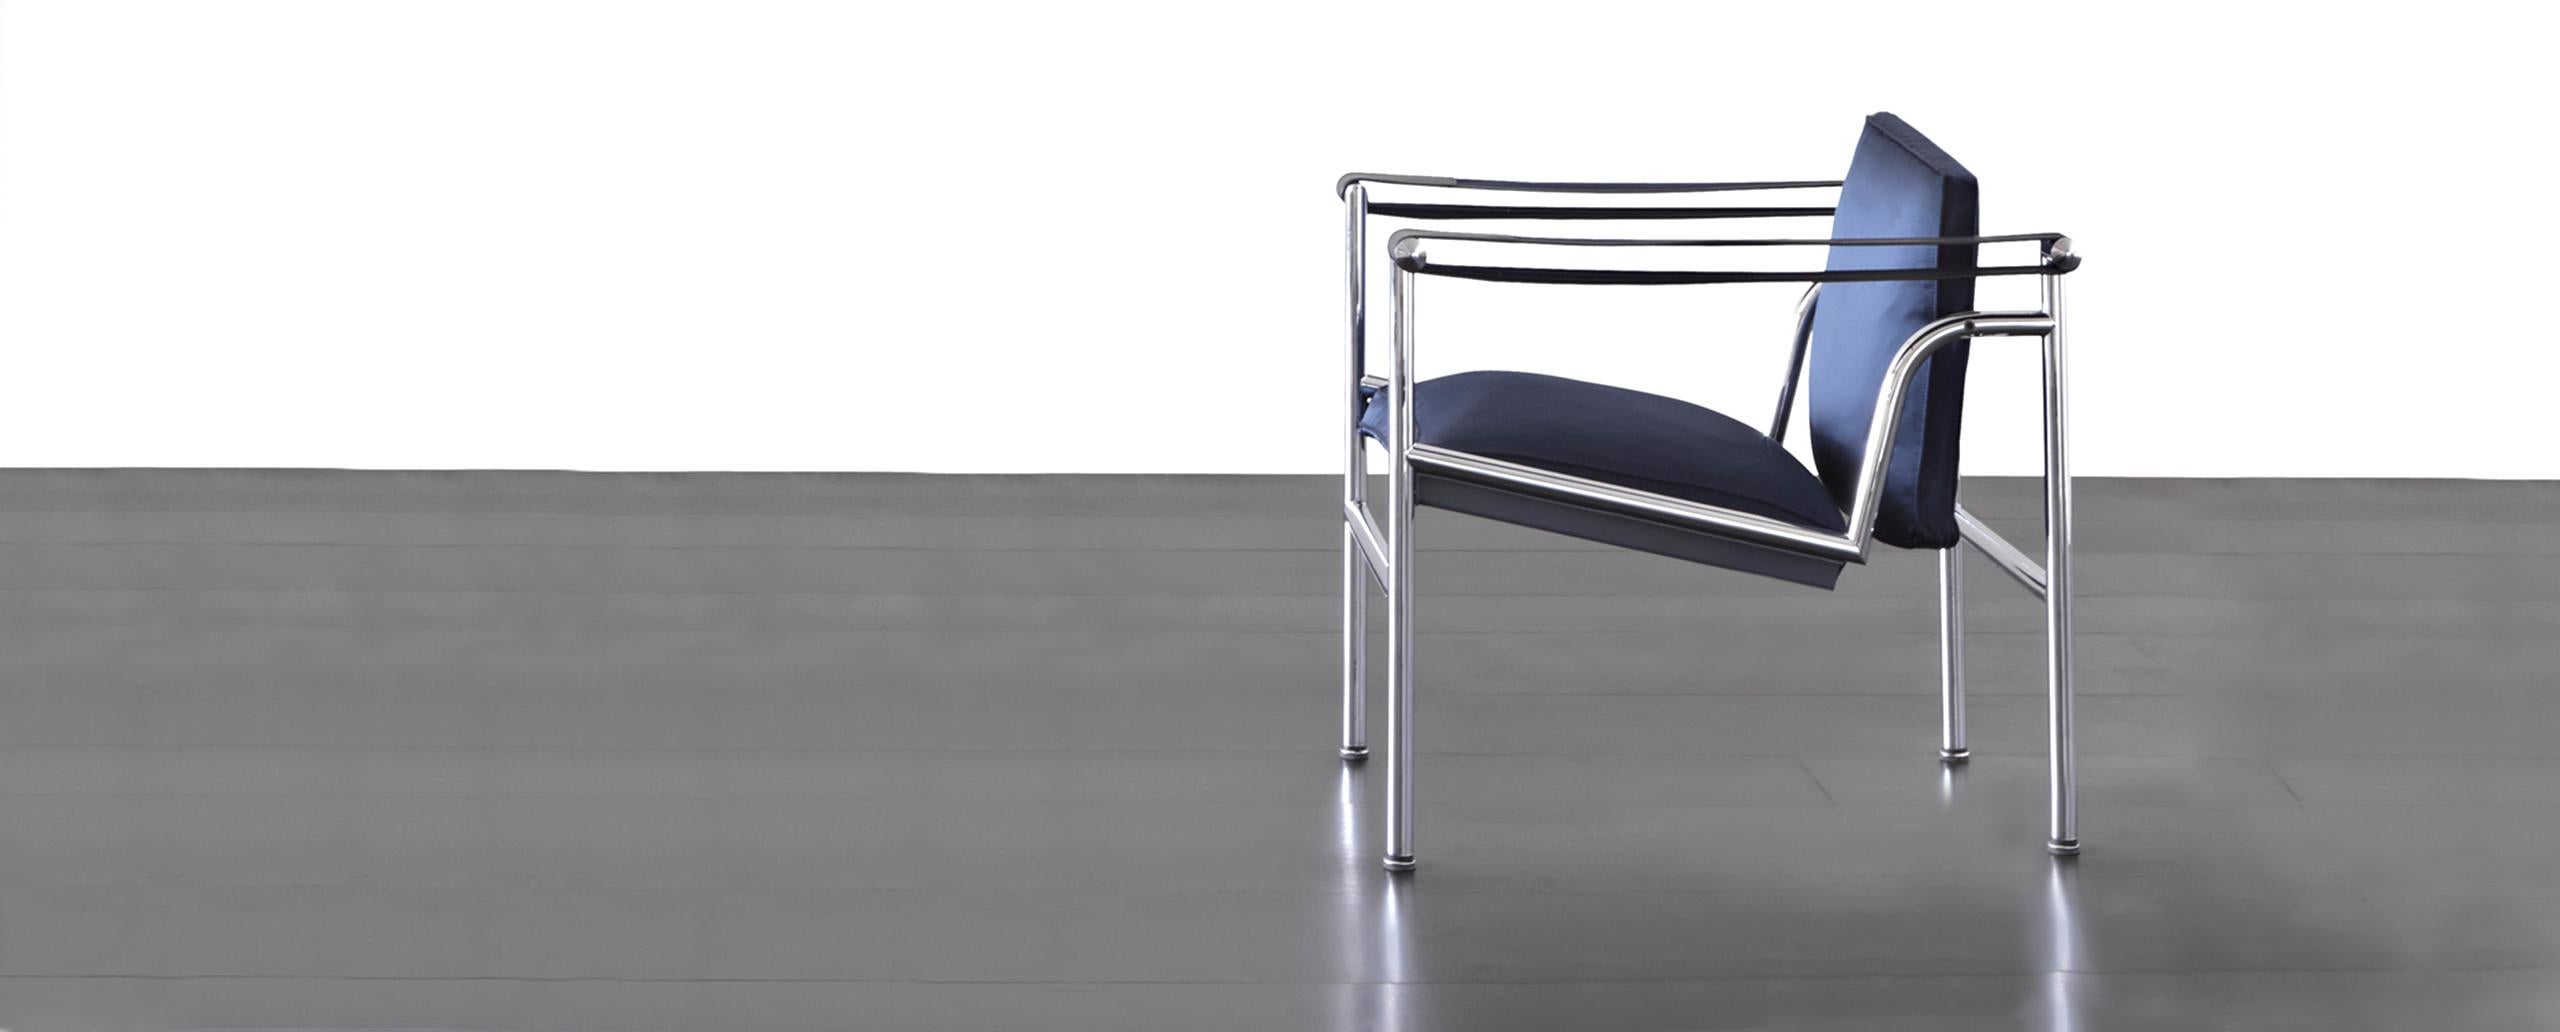 Chair designed by Le Corbusier, Pierre Jeanneret, Charlotte Perriand in 1928. Relaunched in 2012.
Manufactured by Cassina in Italy.

Armchair with structure in polished trivalent chrome plated (CR3) steel. Padded seat and backrest in